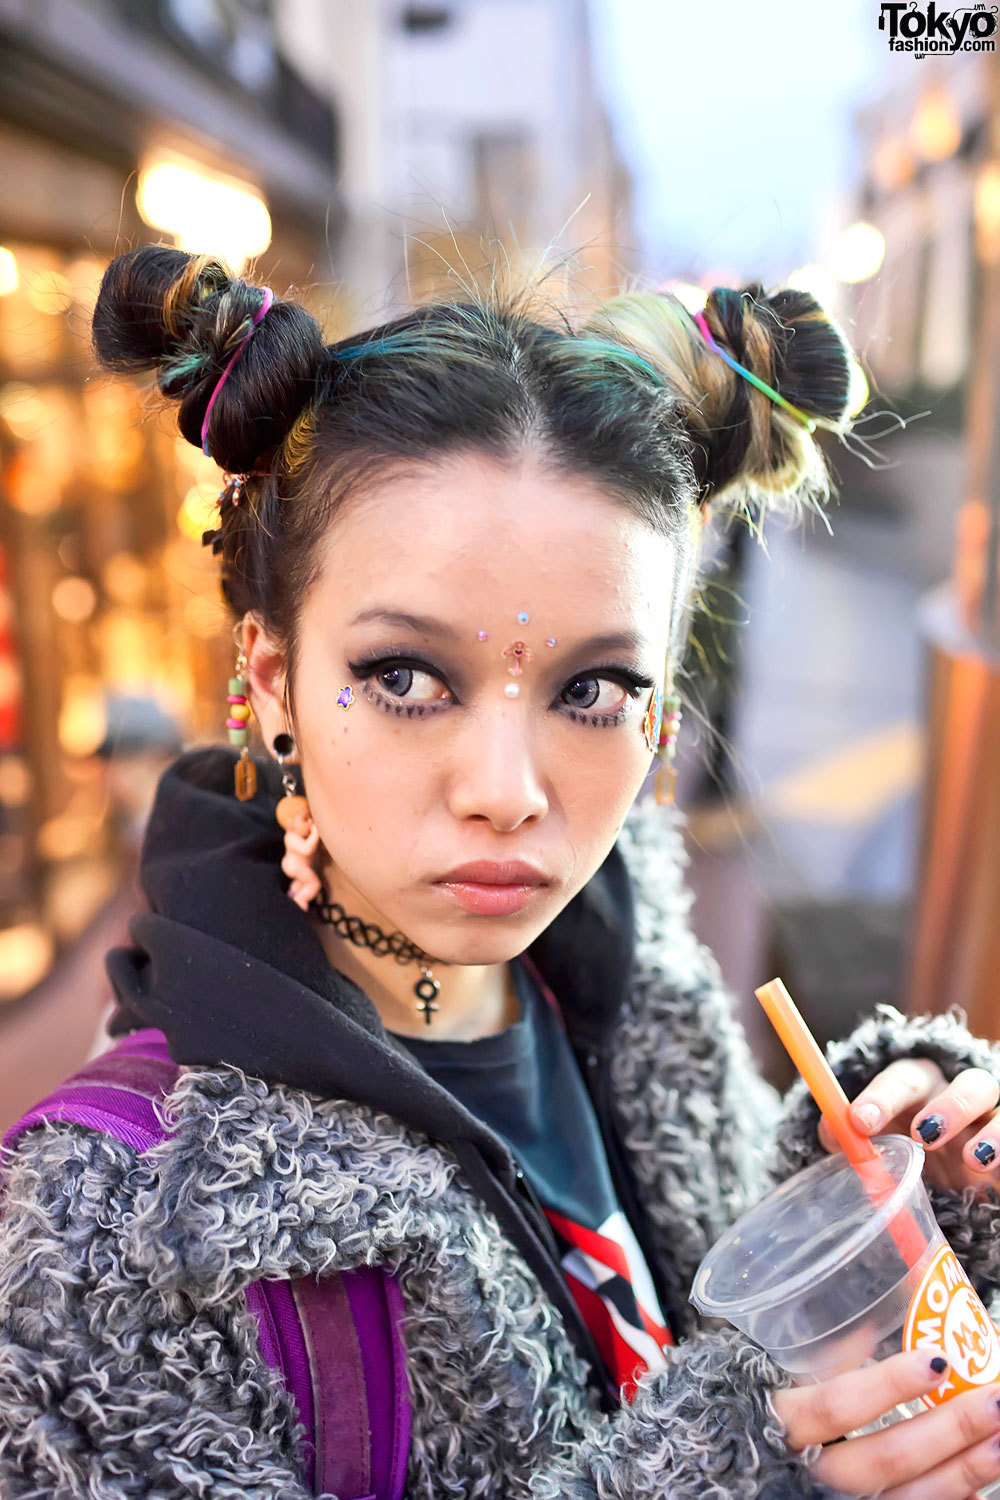 10 Most Popular Japanese Hairstyles You Can Easily Do